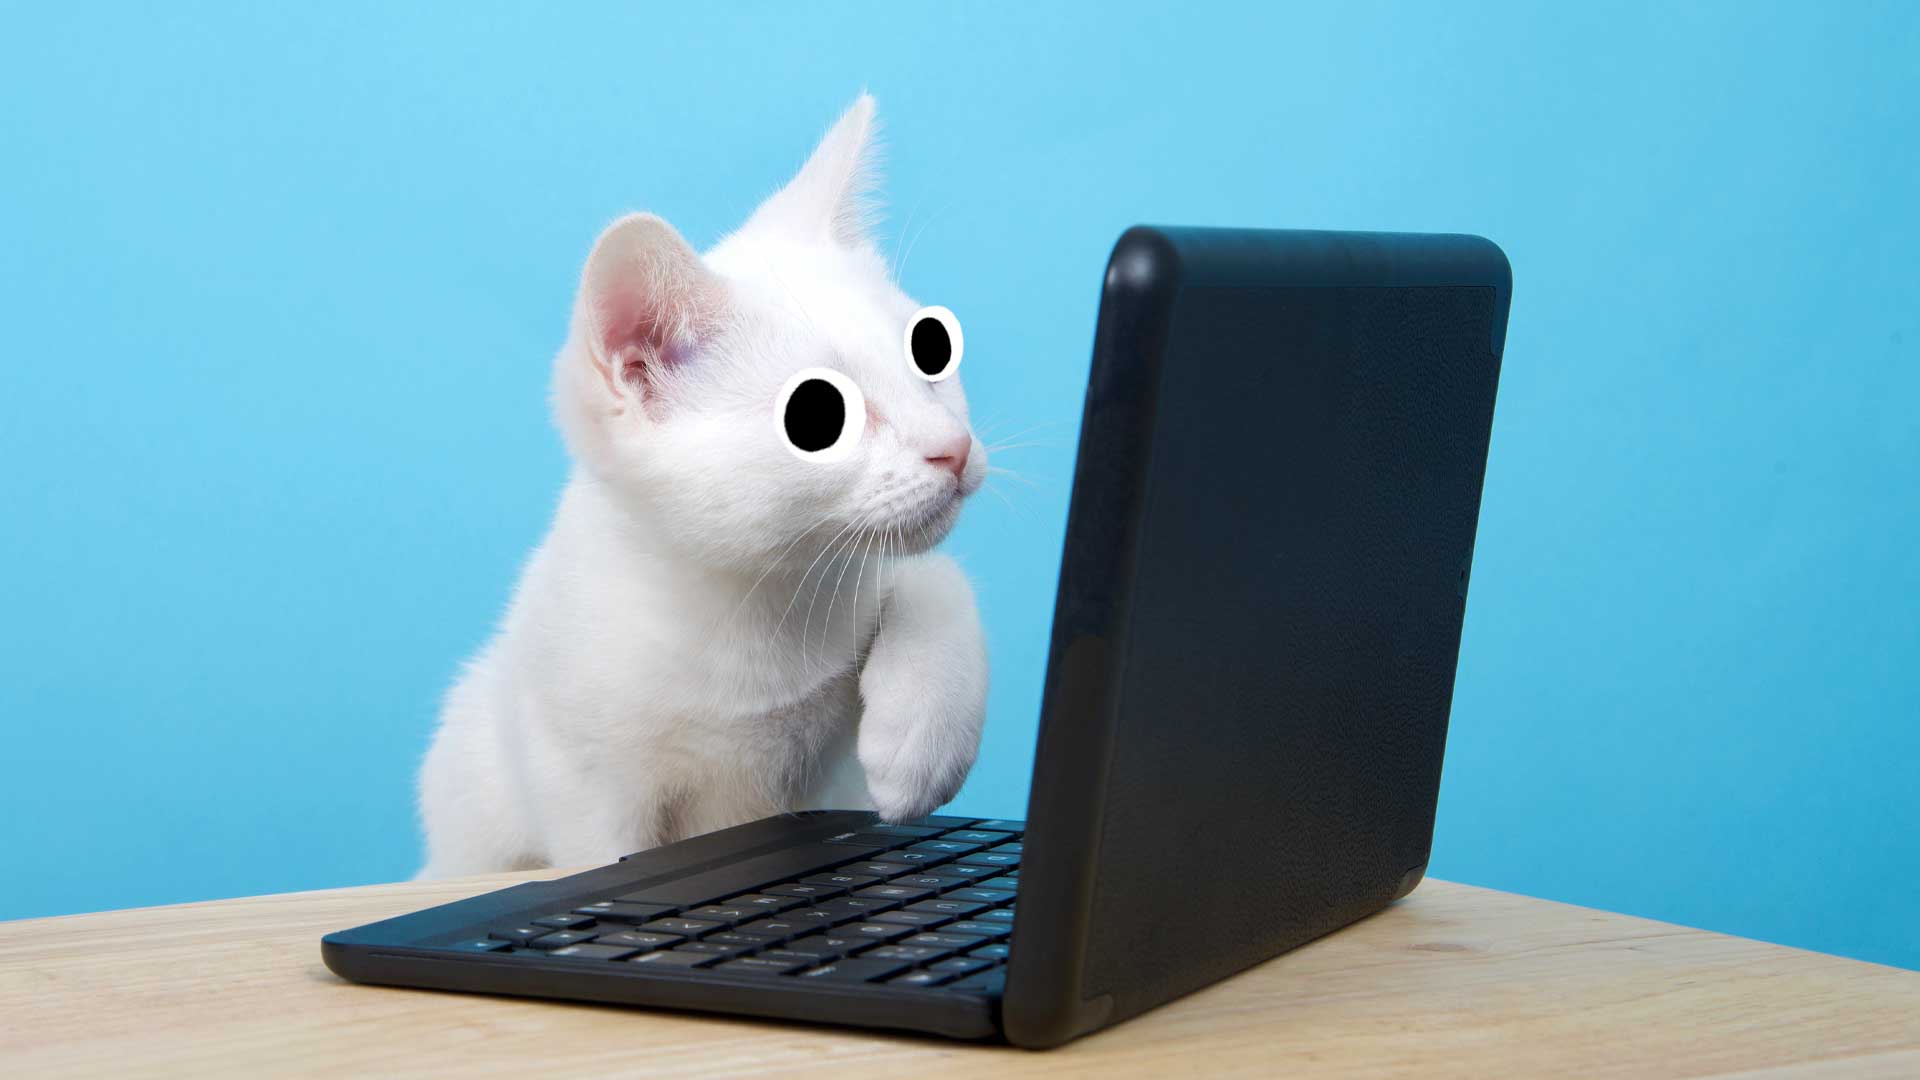 A cat looking at a computer